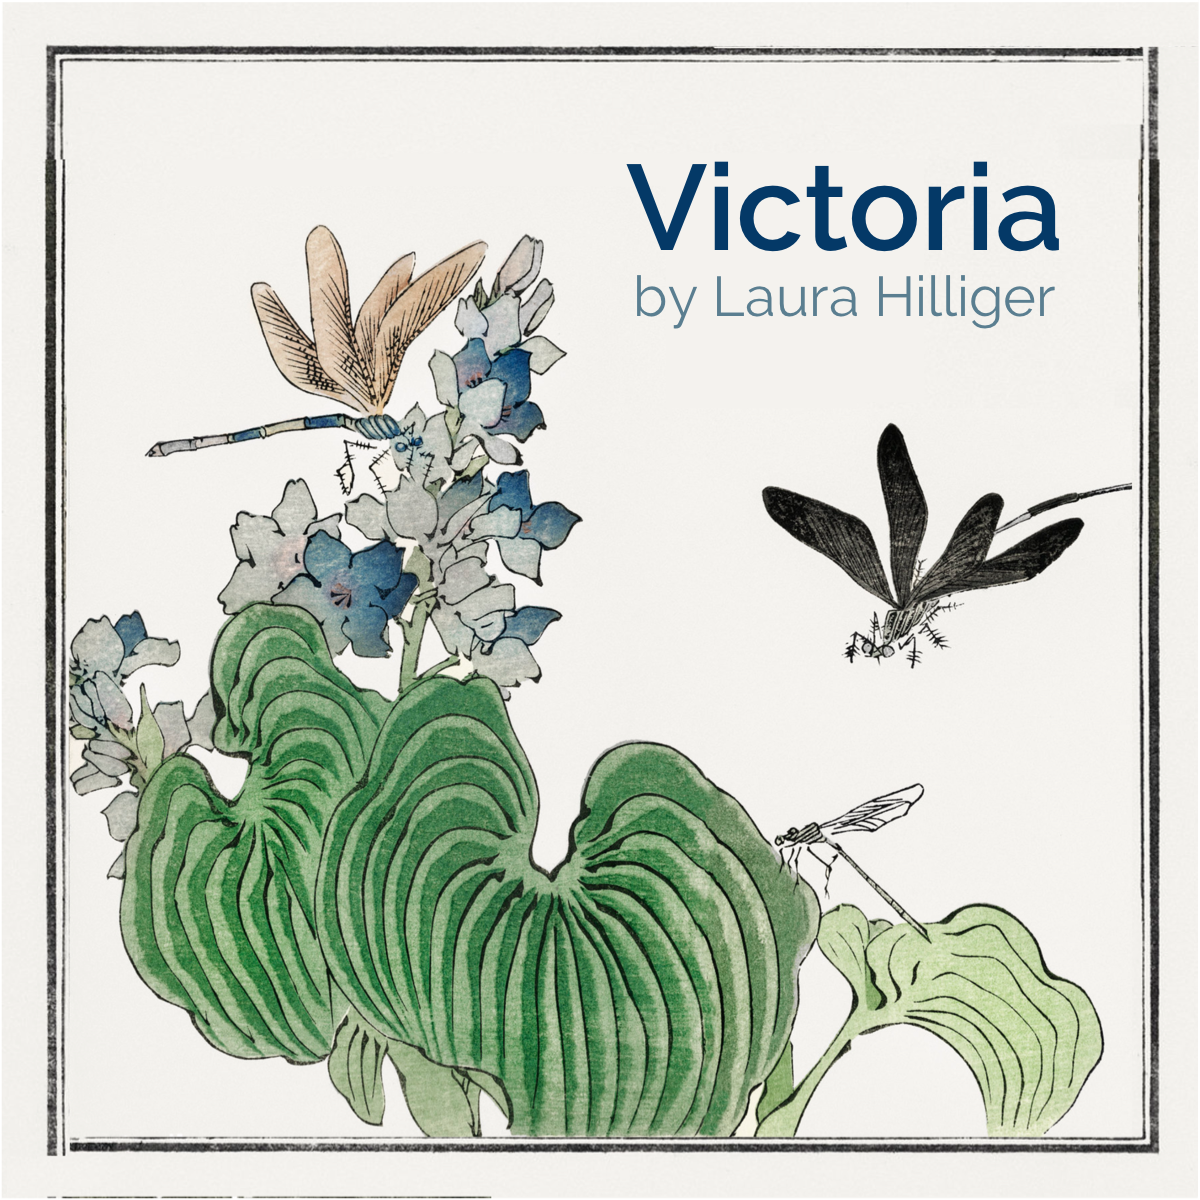 an illustration of a dragonfly about to land on a left with the words Victoria by Laura Hillliger